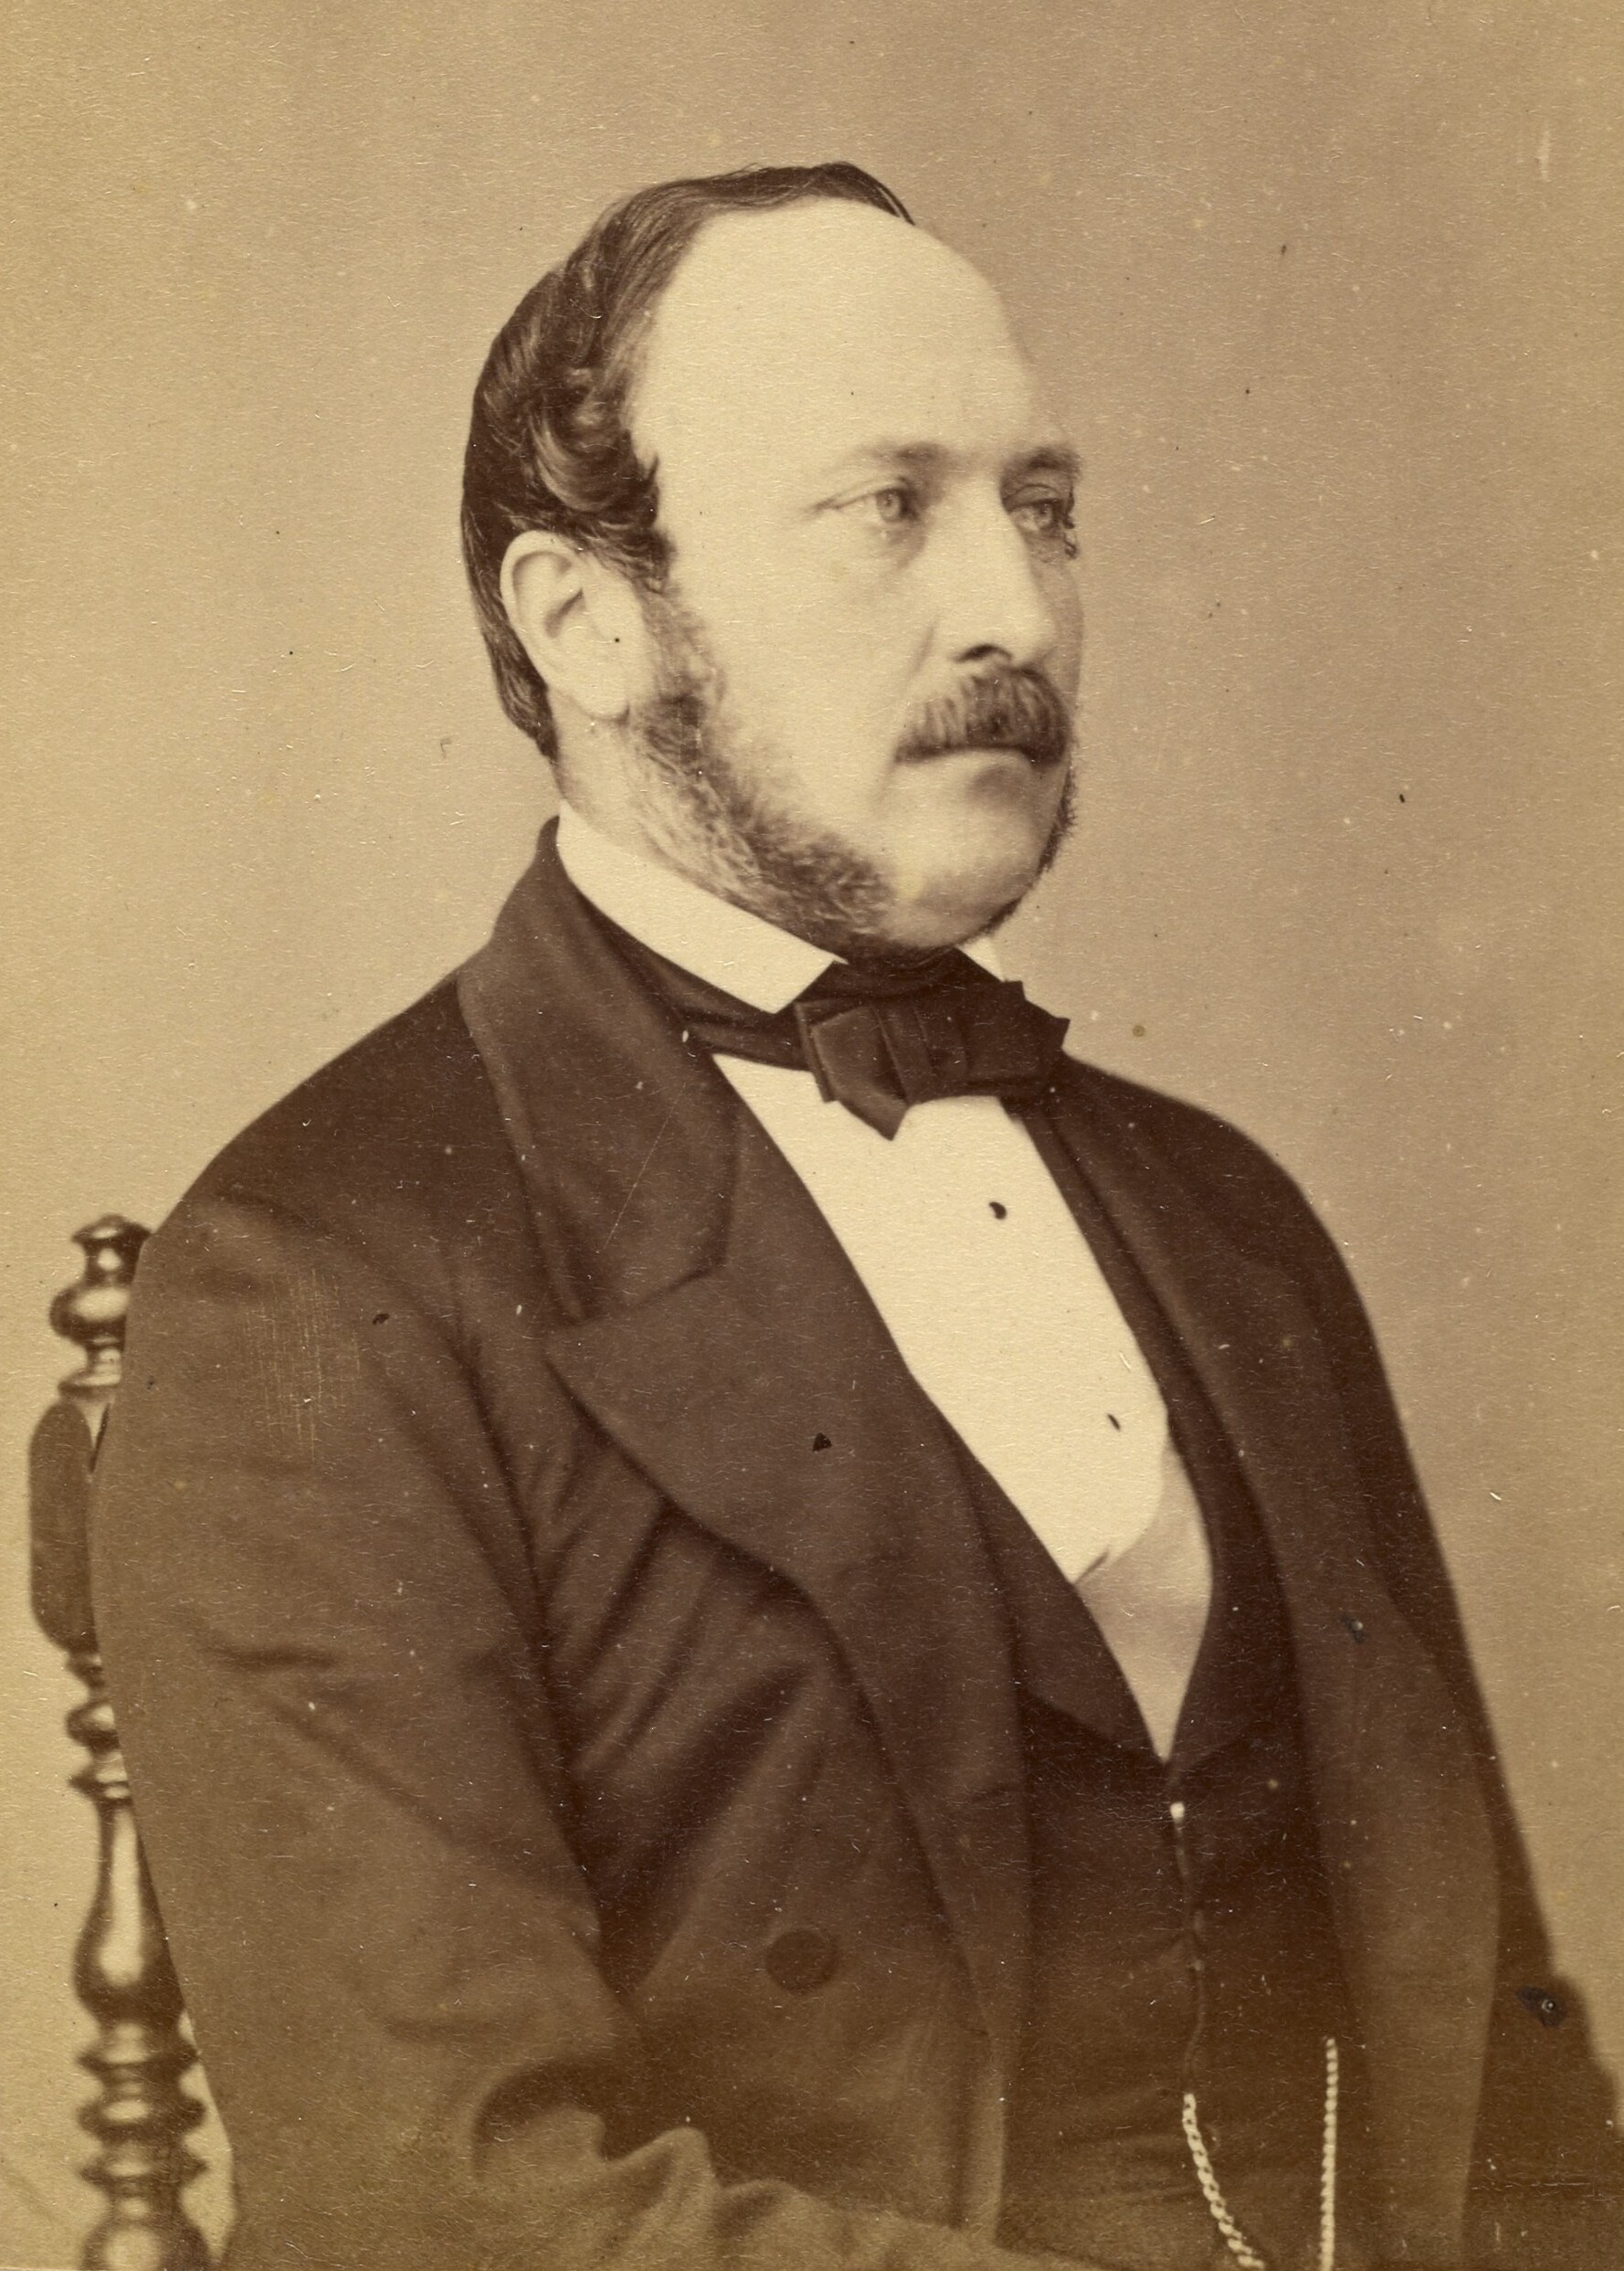 Prince Albert of Saxe-Coburg and Gotha, photographed later in life by Vernon Heath. J. Paul Getty Museum at the Getty Center (Los Angeles). Public Domain.